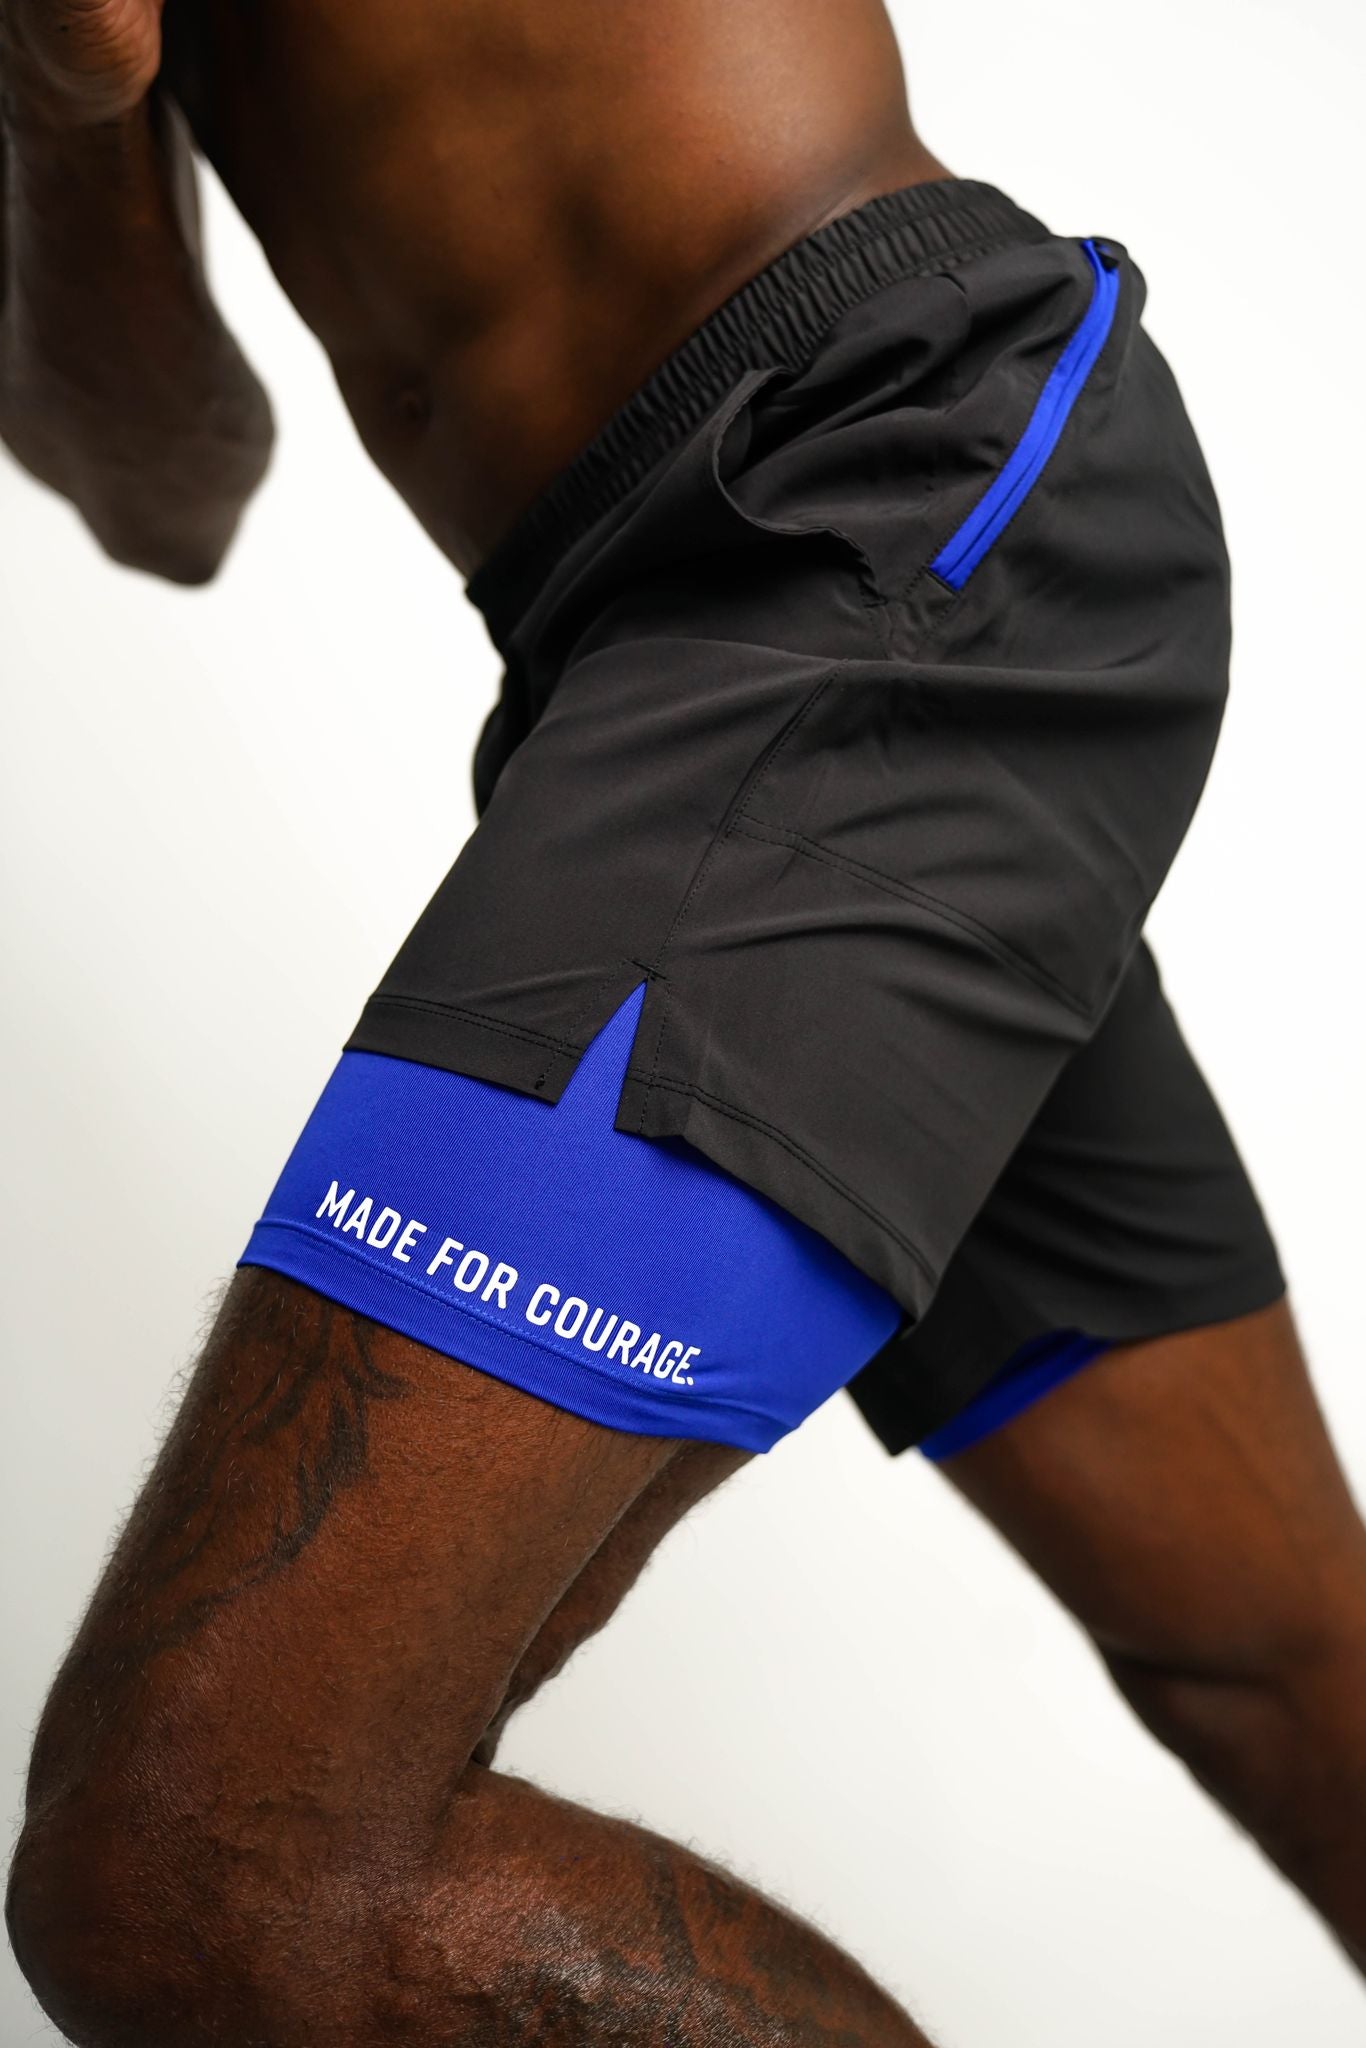 Men's Shorts with Liner - Black with Blue Liner